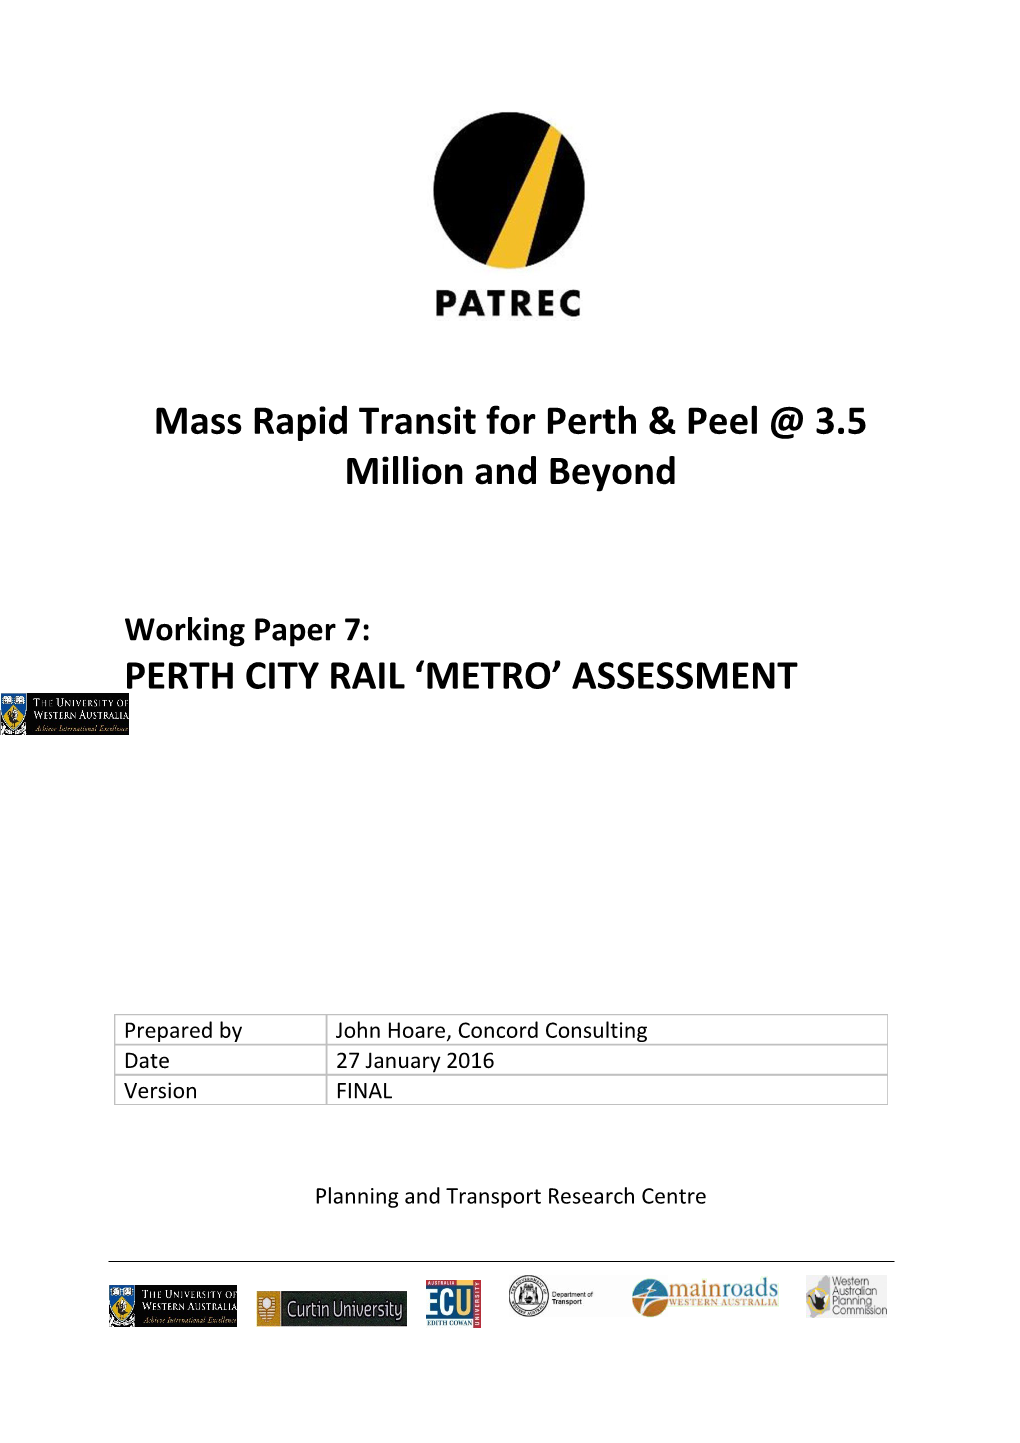 Mass Rapid Transit for Perth & Peel 3.5 Million and Beyond